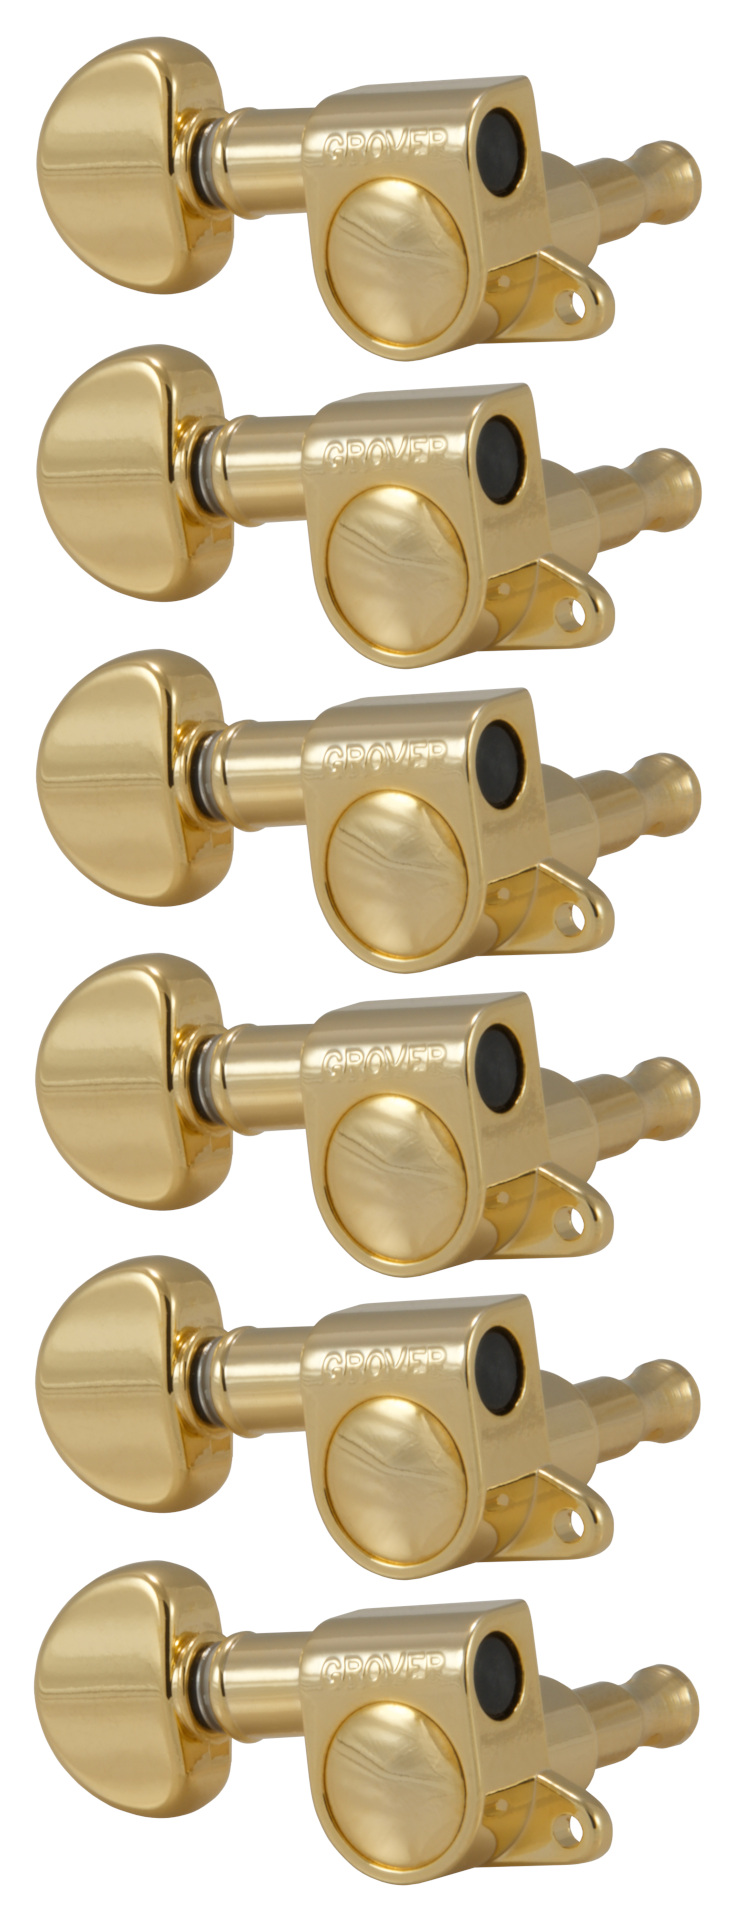 Grover 205GL6 Mini Rotomatics with Round Button - Guitar Machine Heads, 6-in-Line, Lefthand, Treble Side (Right) - Gold